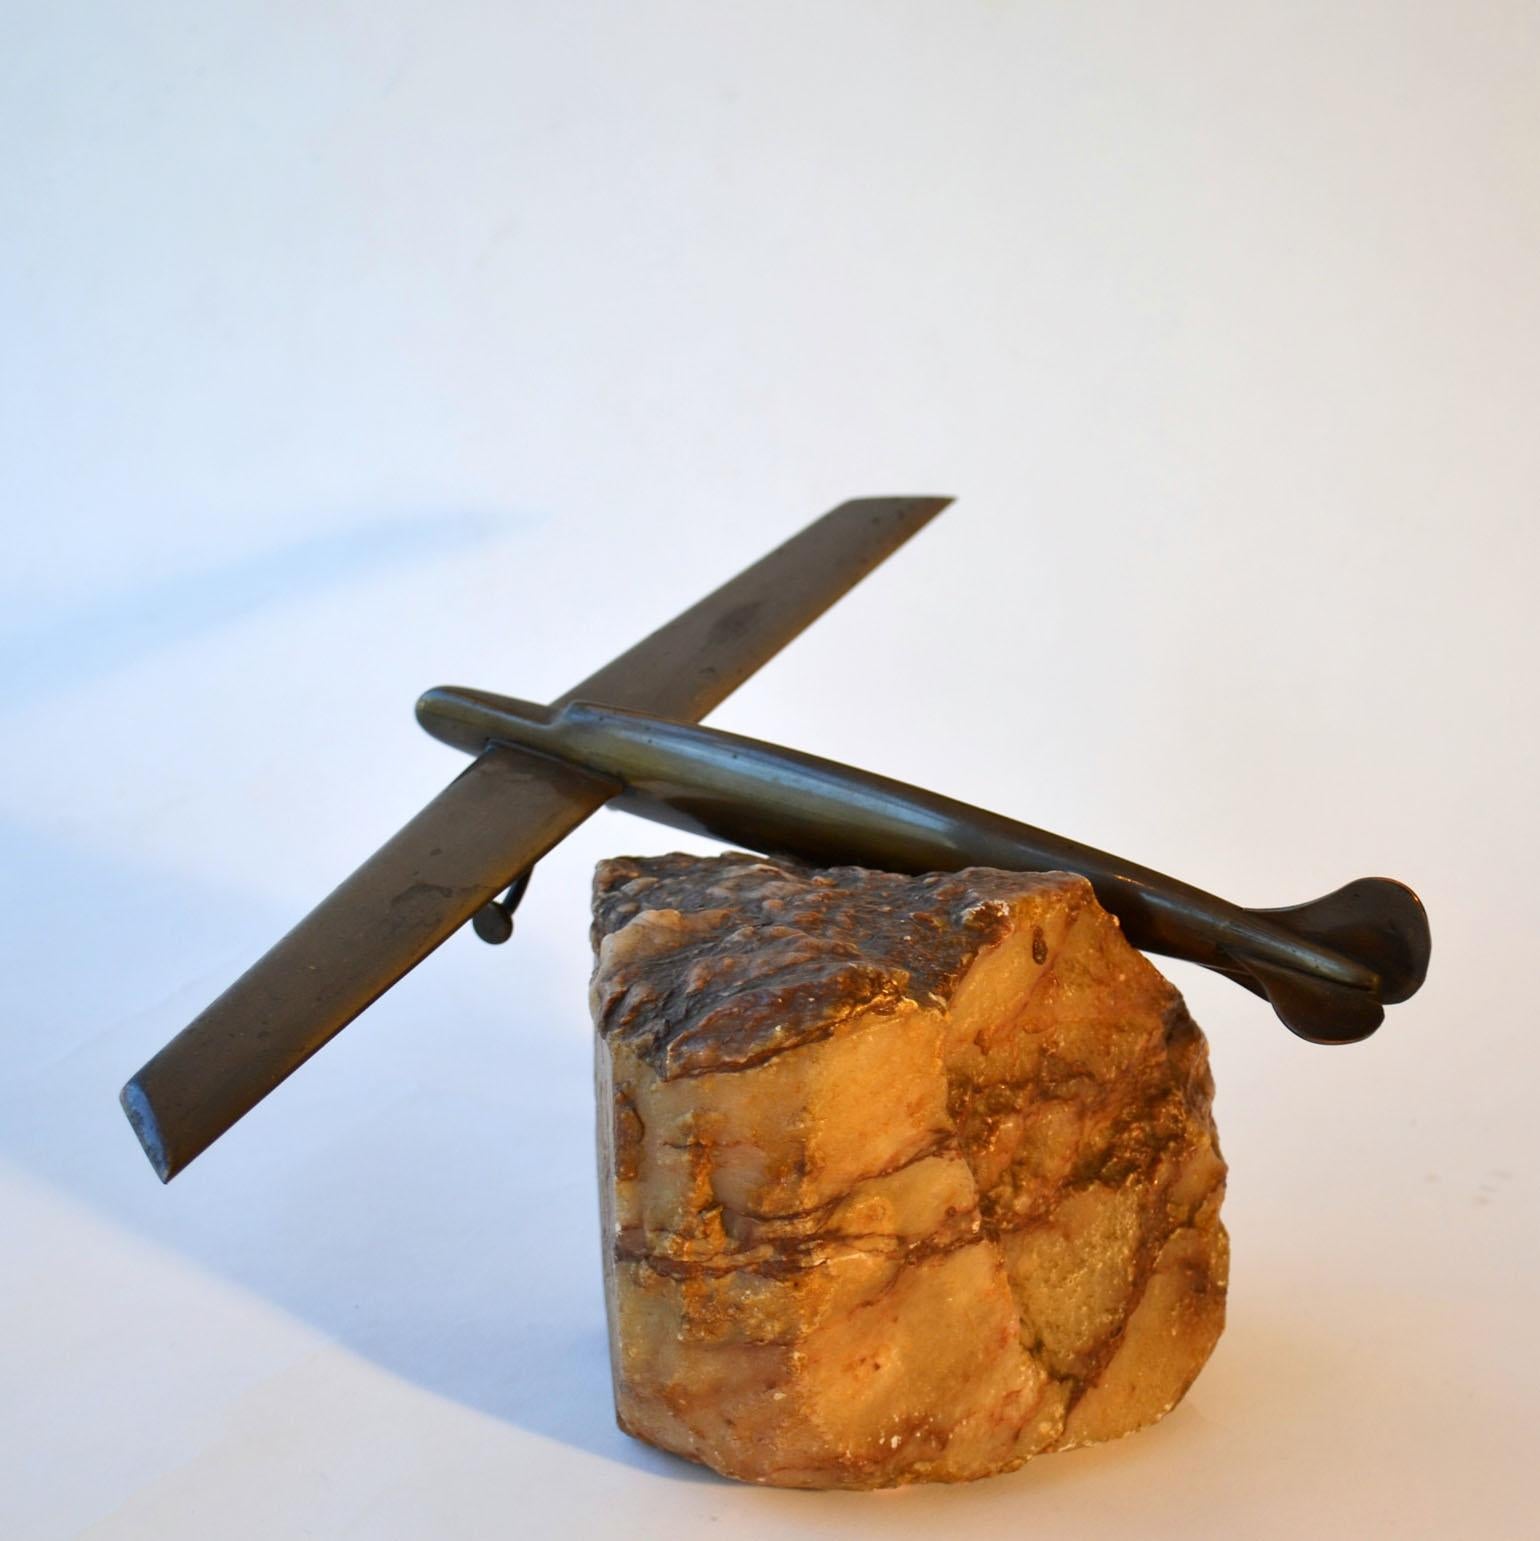 Stylish bronze airplane model, circa 1940s-1950s placed on onyx rock. Decorative sculpture that displays well cupboard, credenza or a desk.